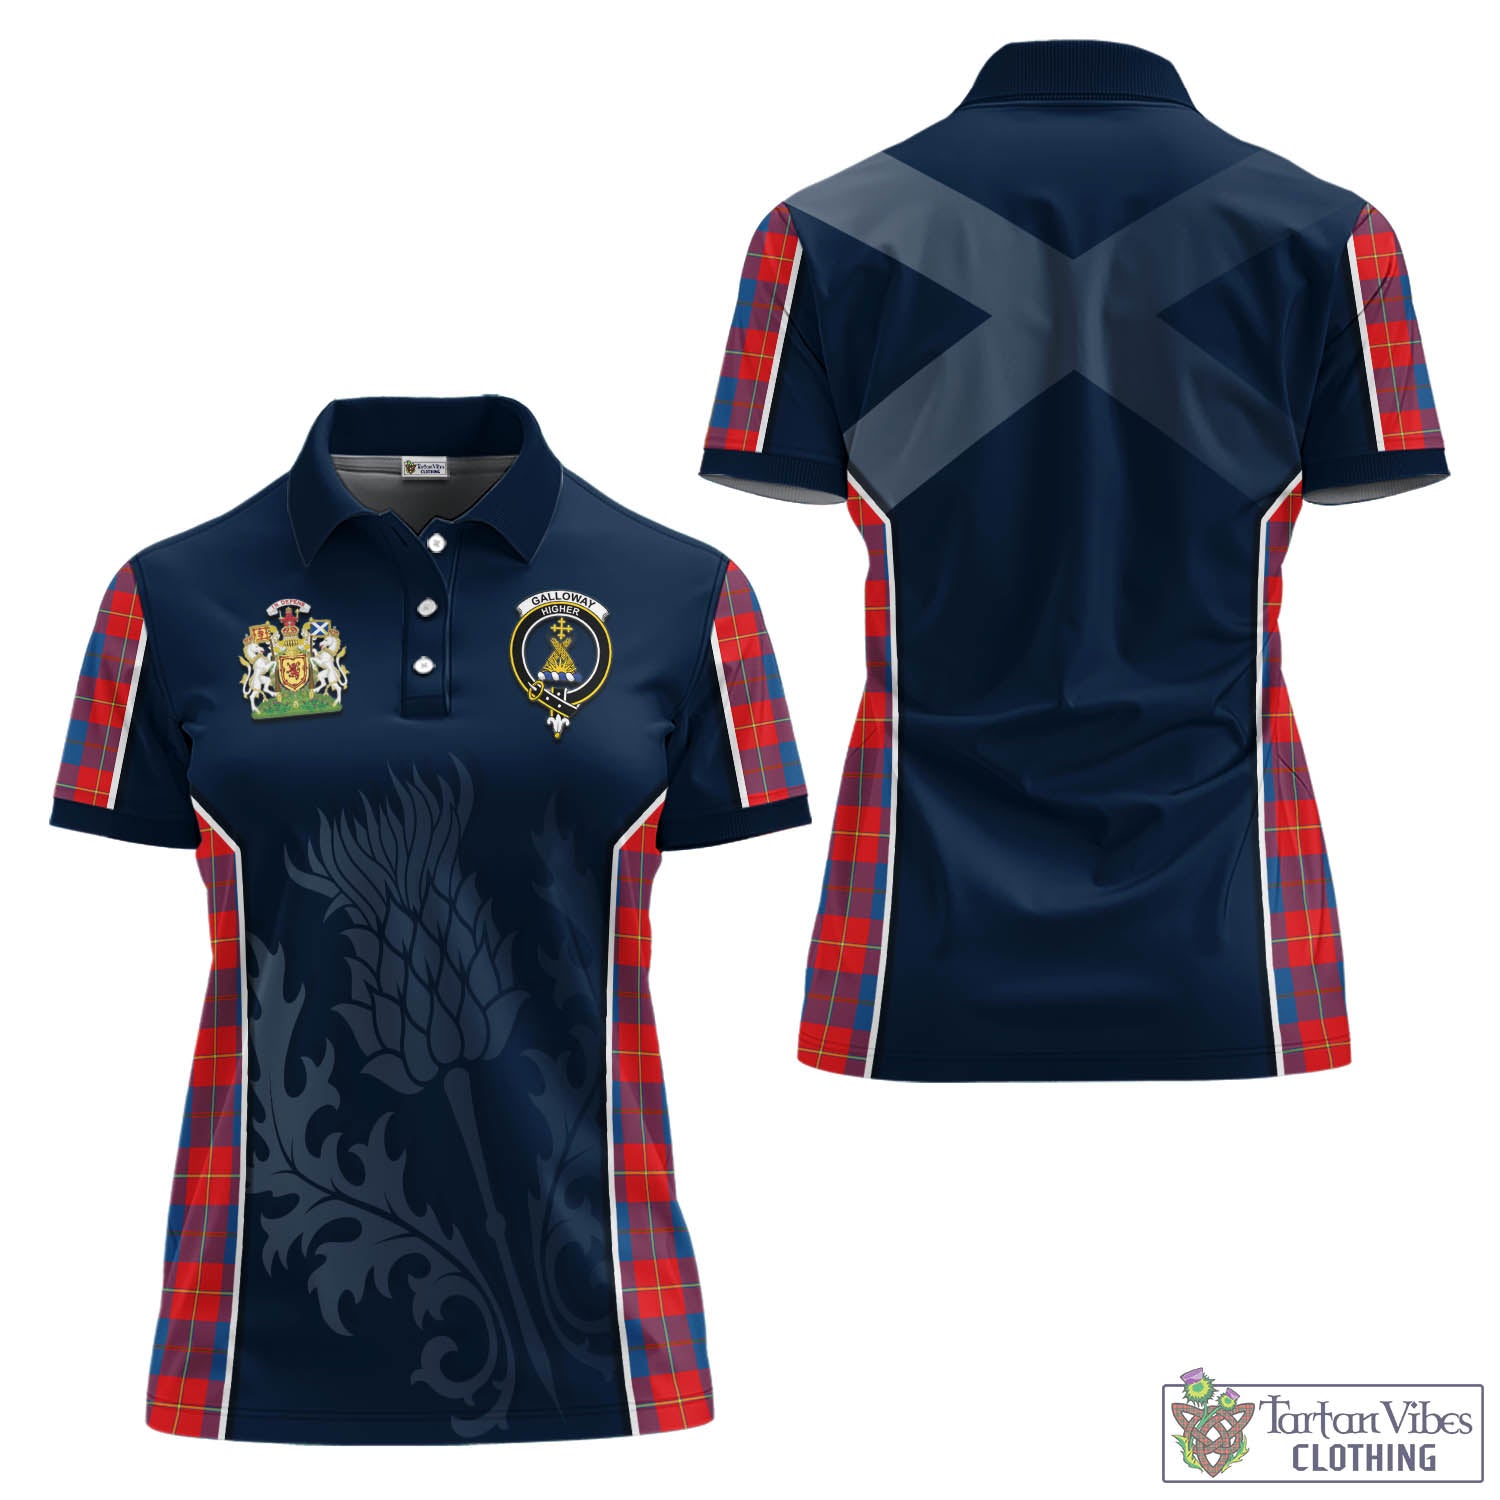 Tartan Vibes Clothing Galloway Red Tartan Women's Polo Shirt with Family Crest and Scottish Thistle Vibes Sport Style